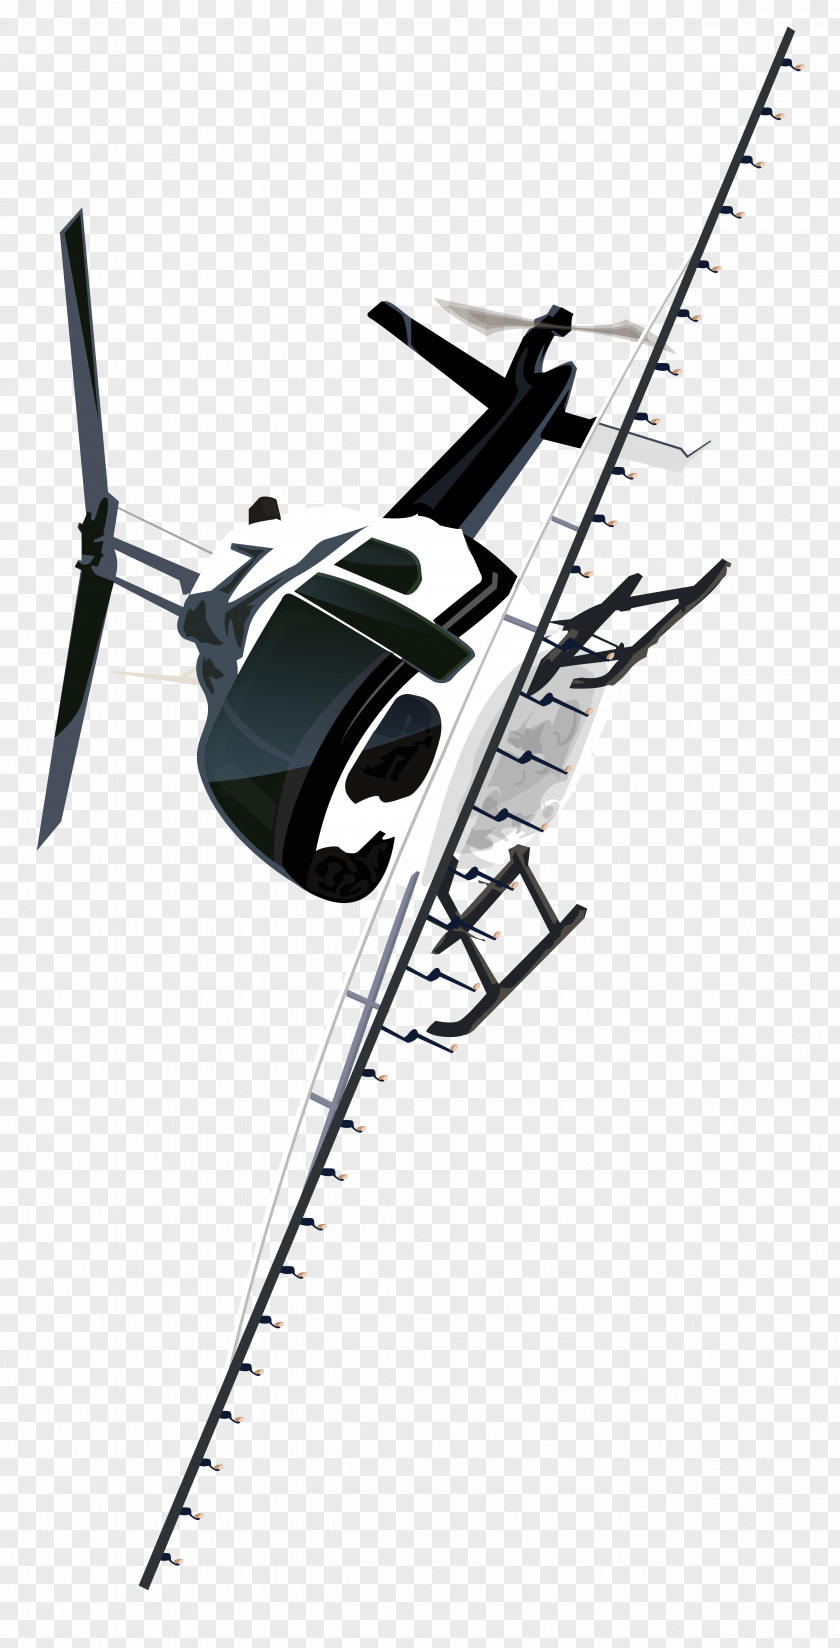 Make Up Artist Helicopter Rotor Airplane Product Design Electronics Accessory PNG